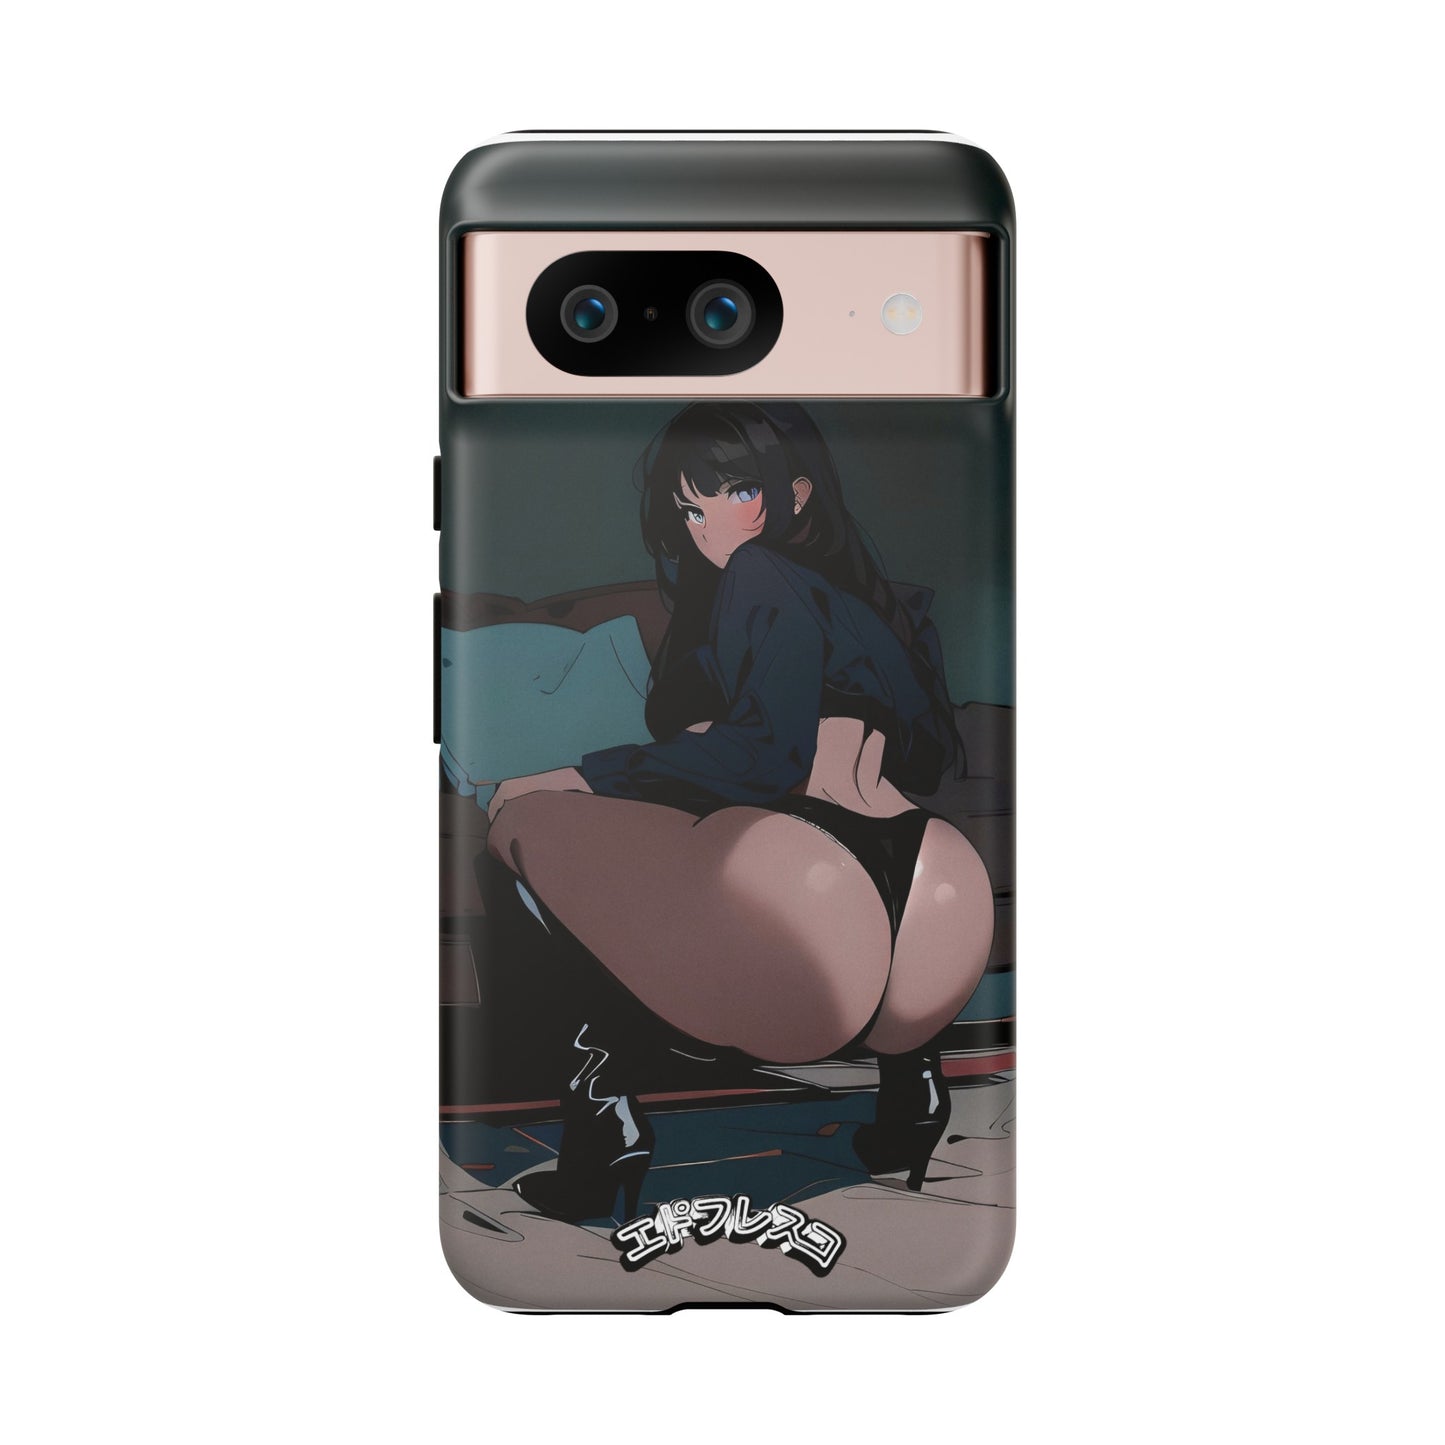 Anime Style Art Tough Cases- "Blessed"